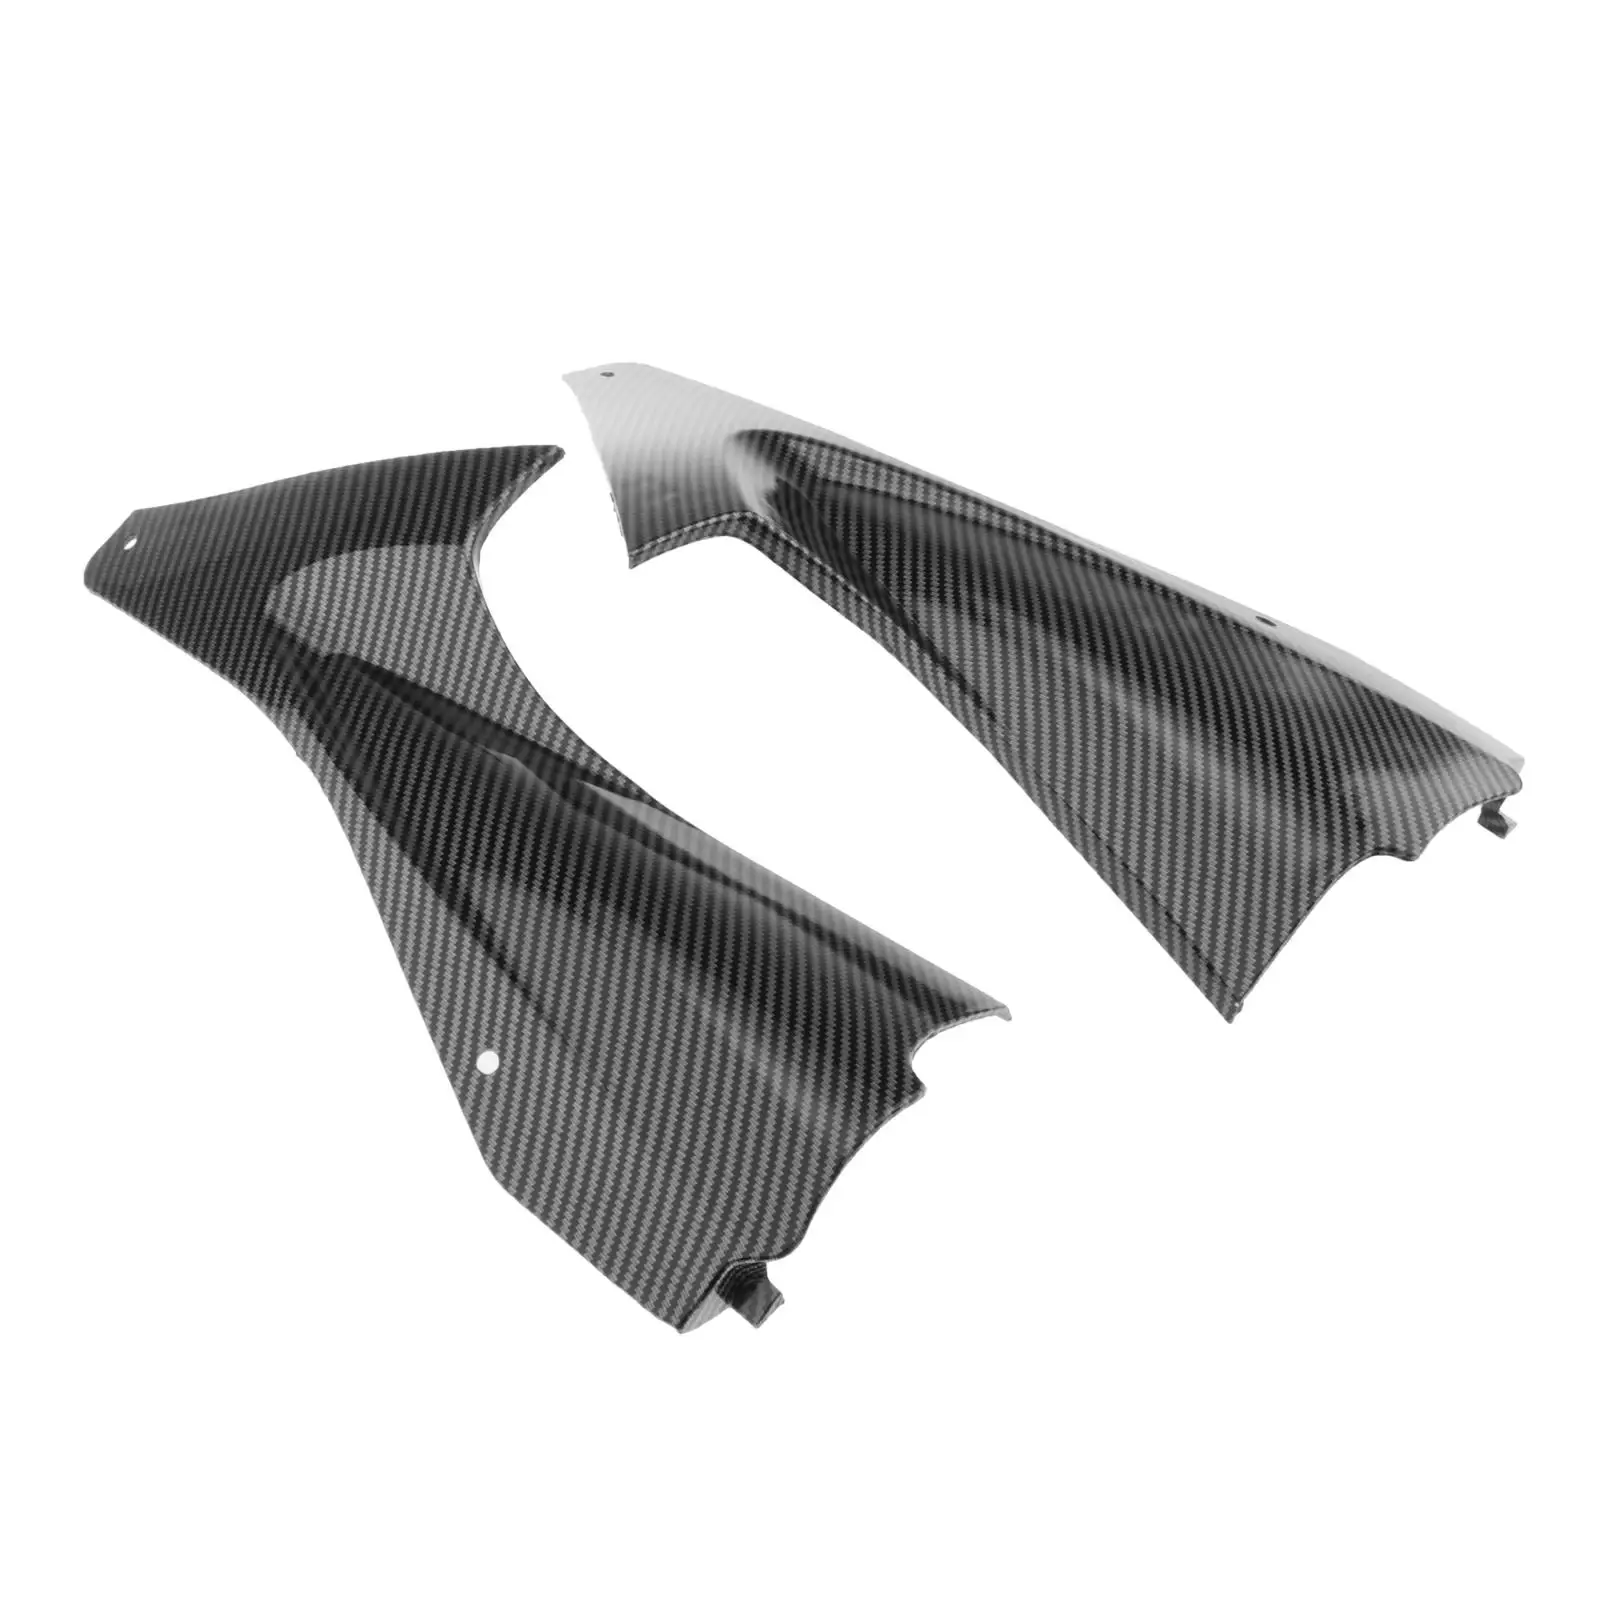 1 Pair of Side Air Duct Covers for Yamaha R6 2008-2014 Accessories